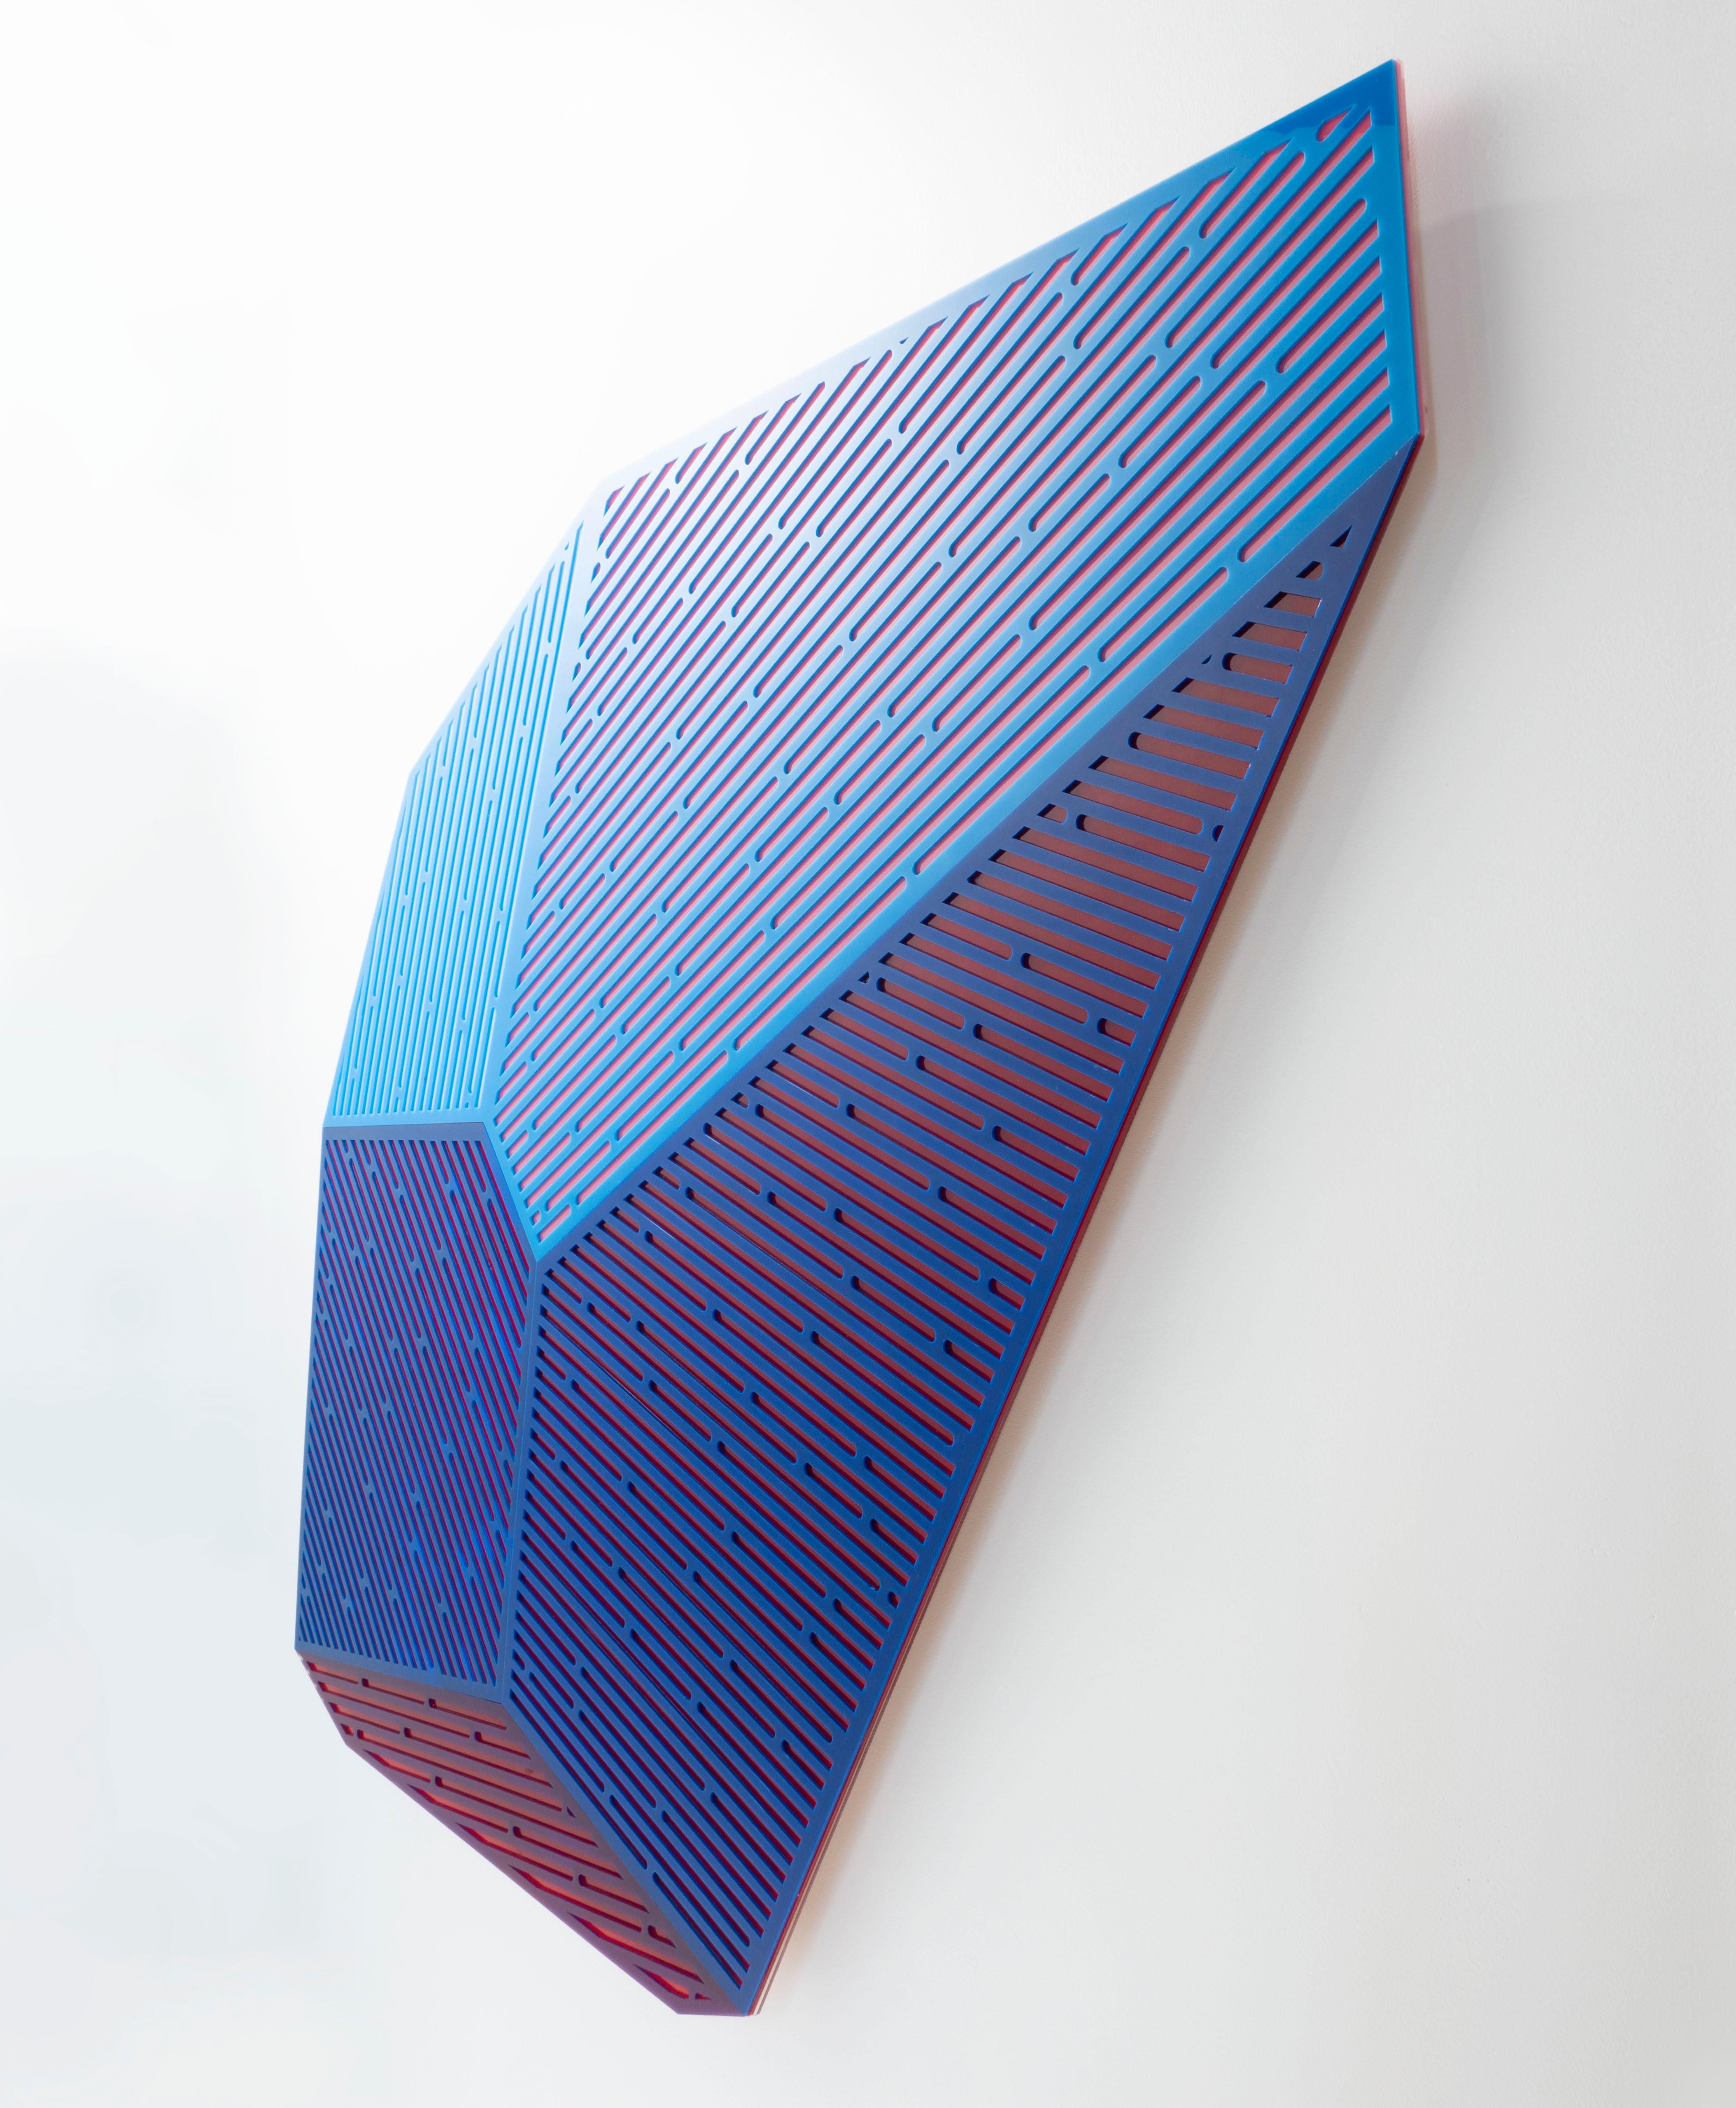 Prismatic Polygon III:  geometric abstract wall-mounted sculpture in blue & red - Sculpture by Jay Walker